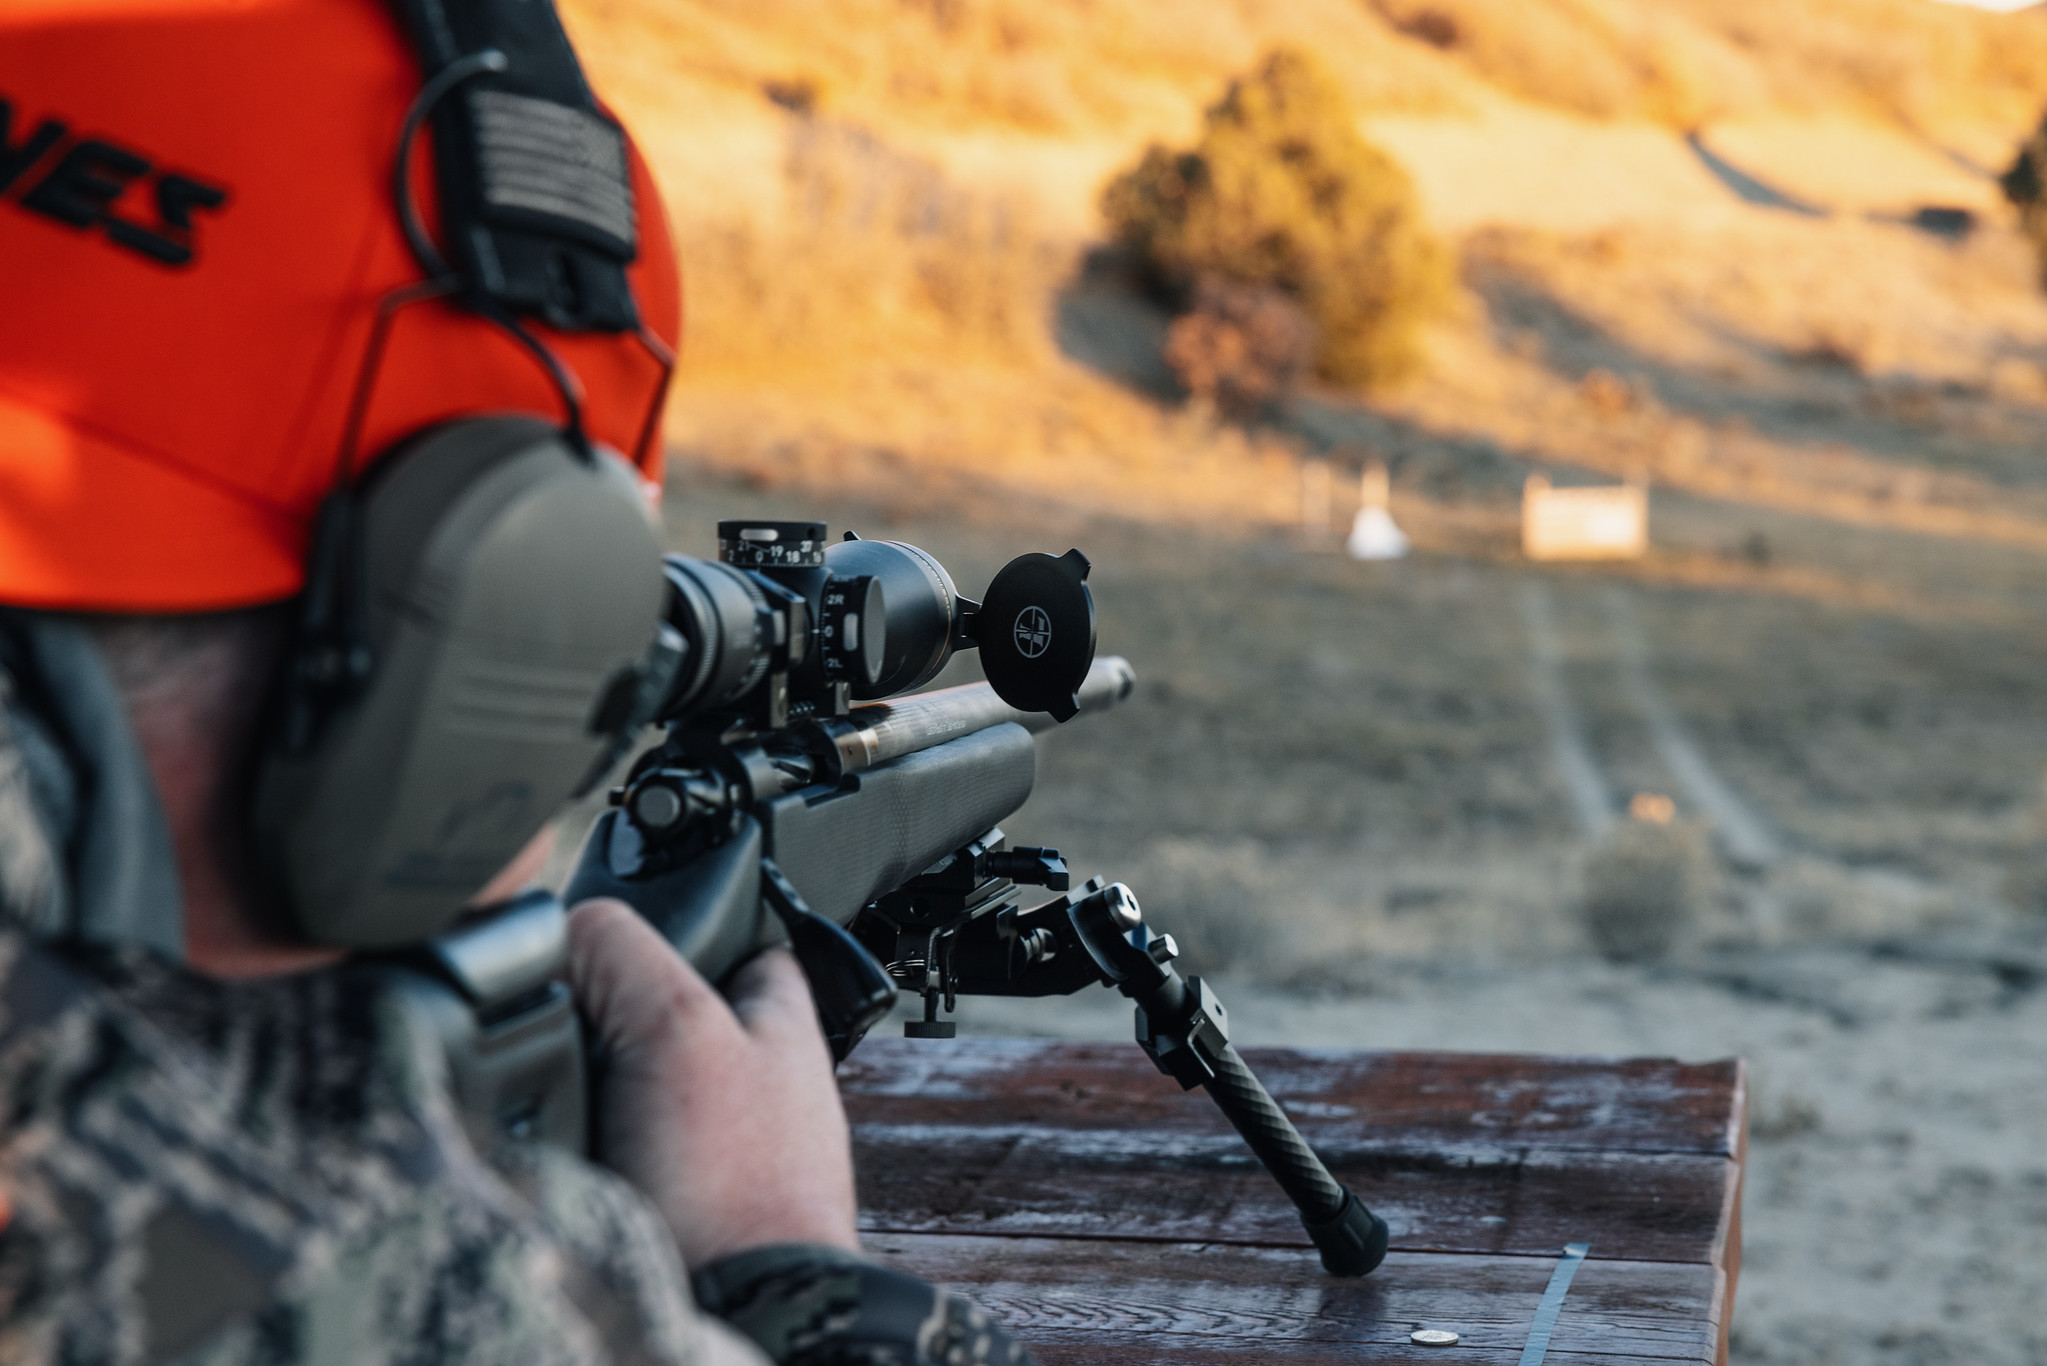 A stable rest like a bipod or sand bag is critical to sighting-in properly.